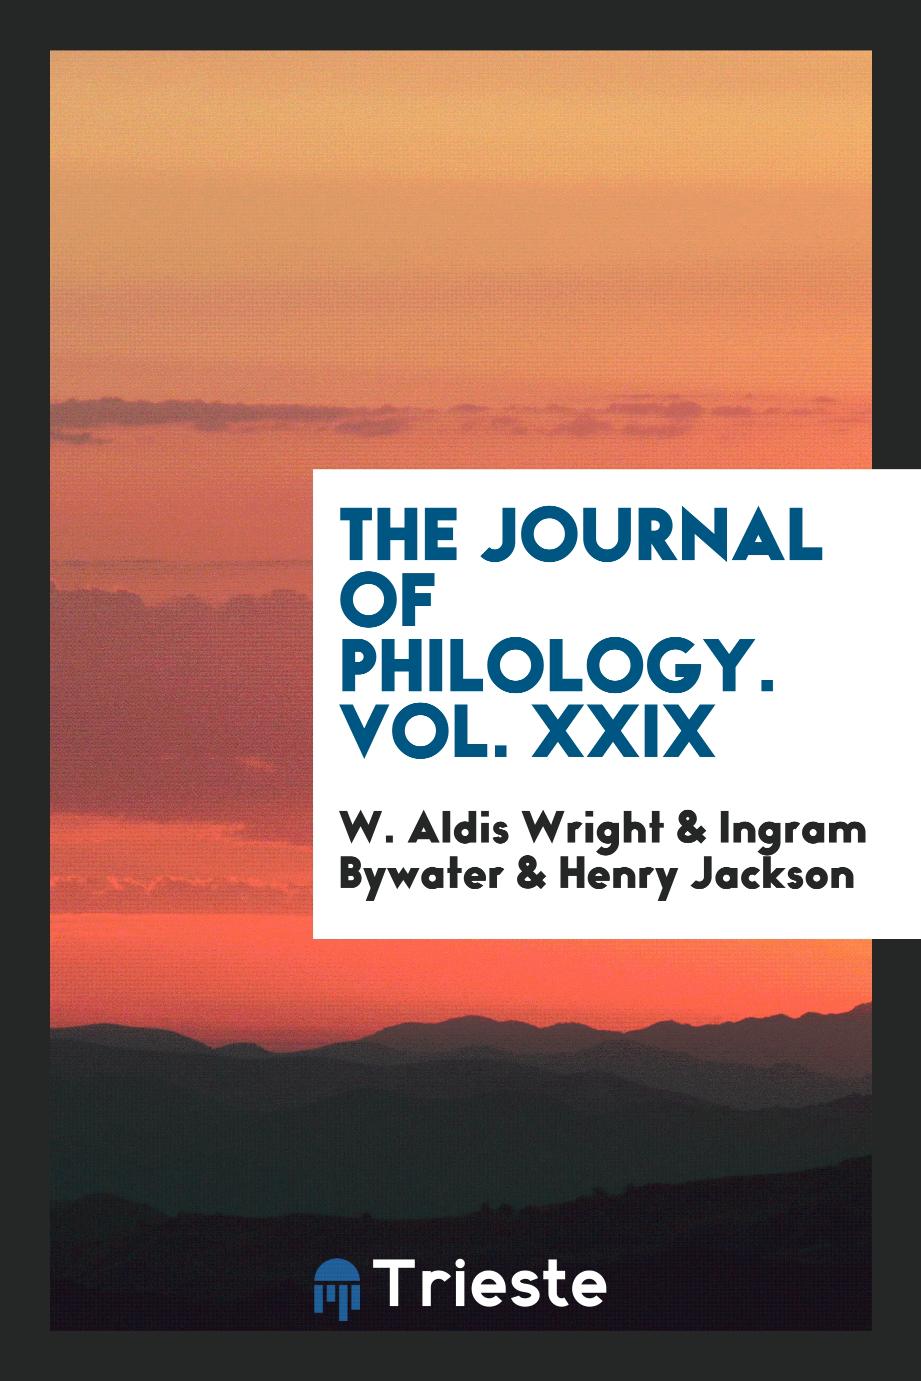 The Journal of philology. Vol. XXIX